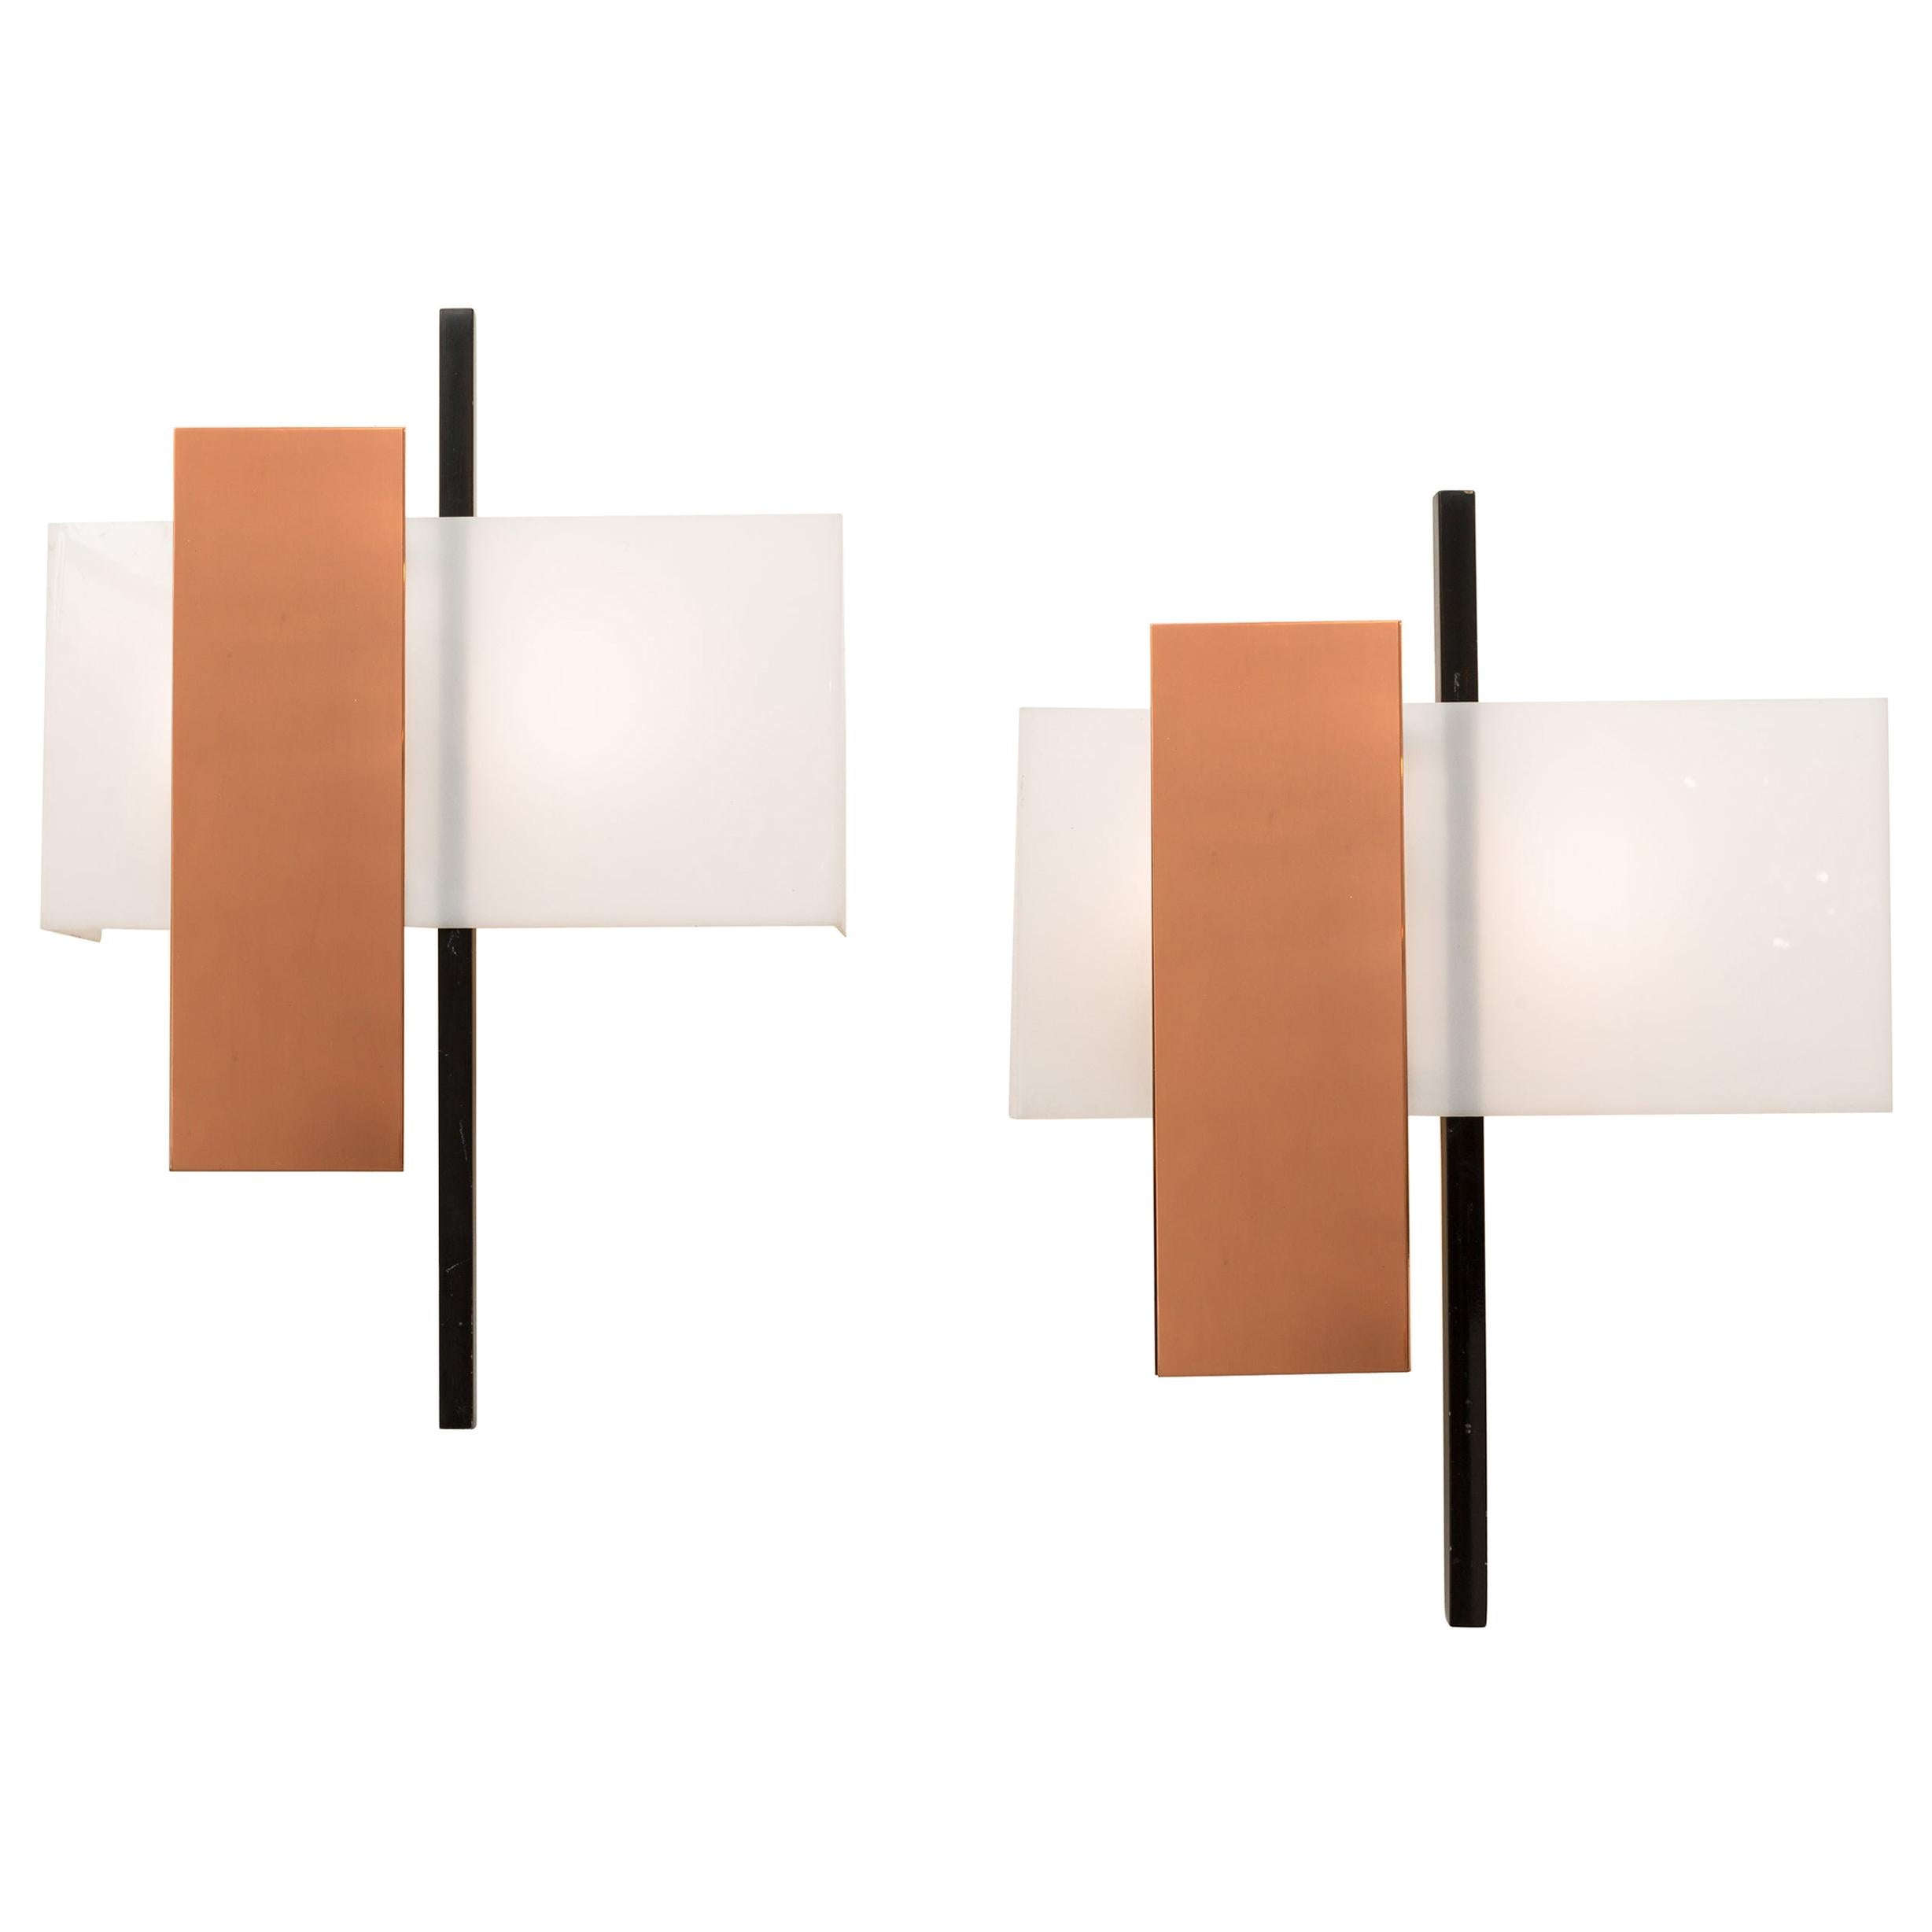 BAG Turgi Copper and Perspex Sconces, Switzerland, 1960s For Sale